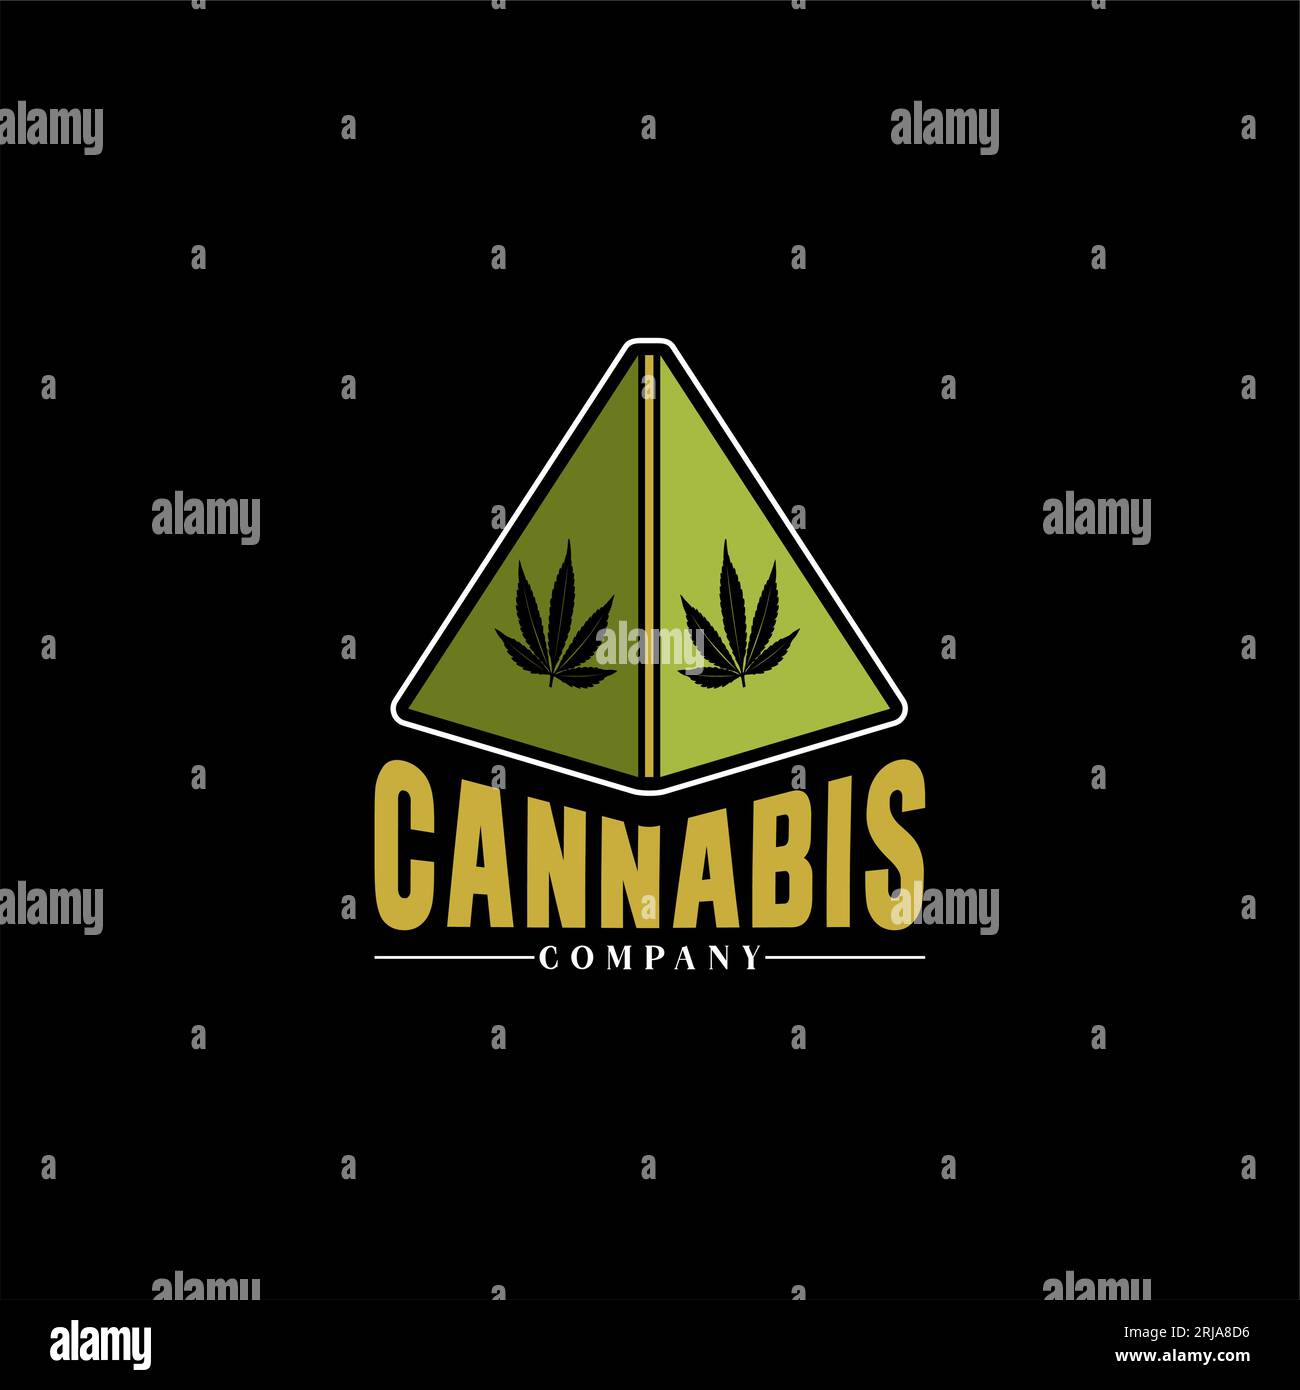 Pyramid And Cannabis Leaves For CBD Marijuana Products Label Vector Design Stock Vector